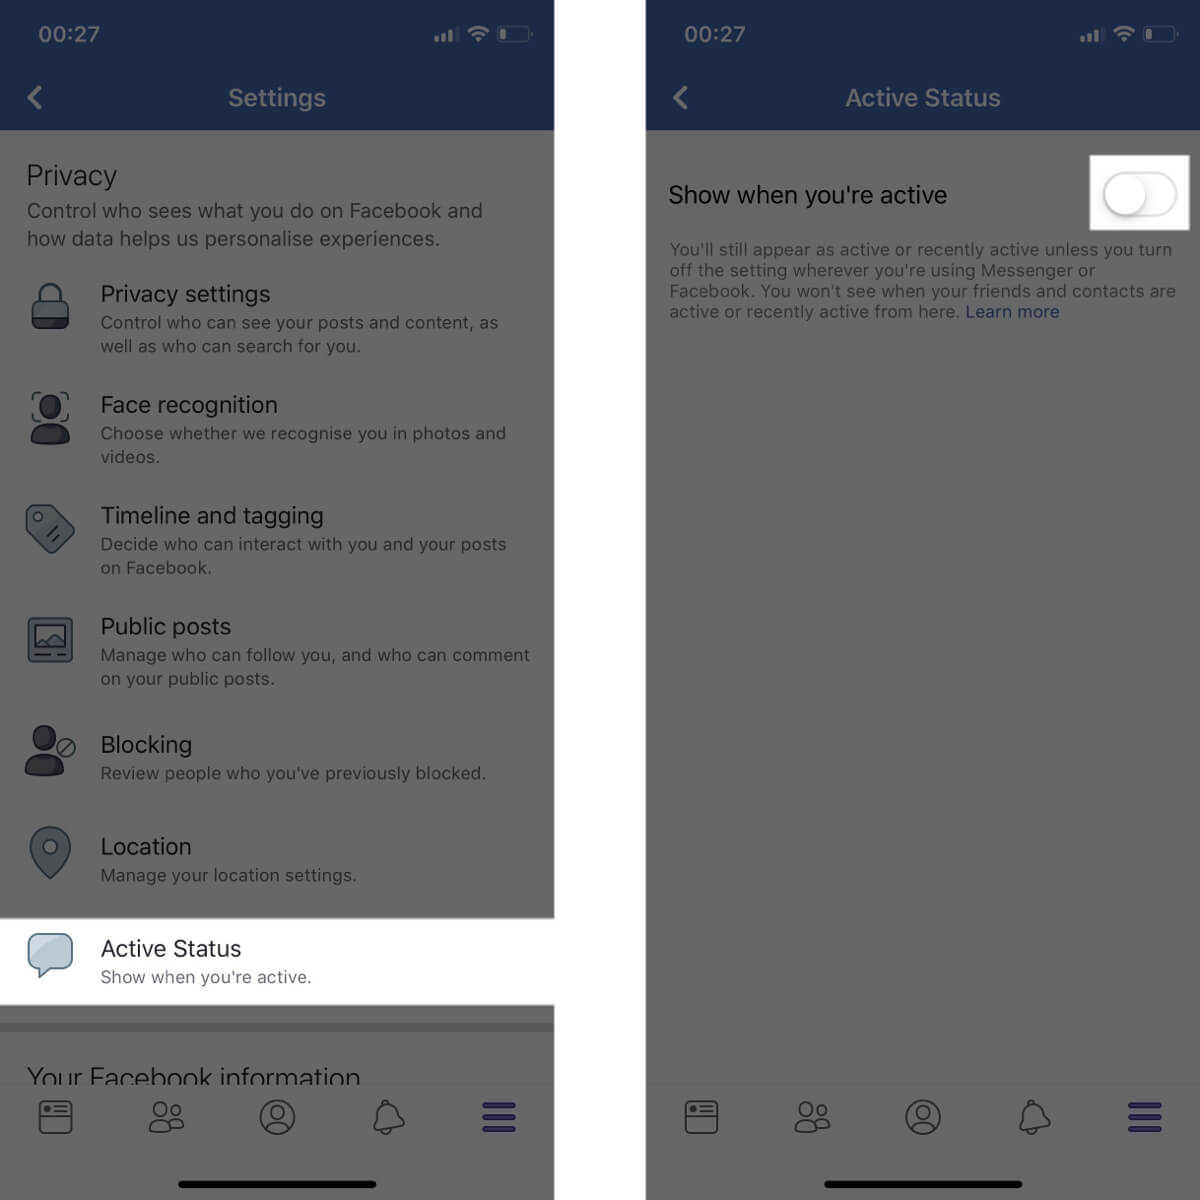 Screenshots showing how to access your active status settings on Facebook.